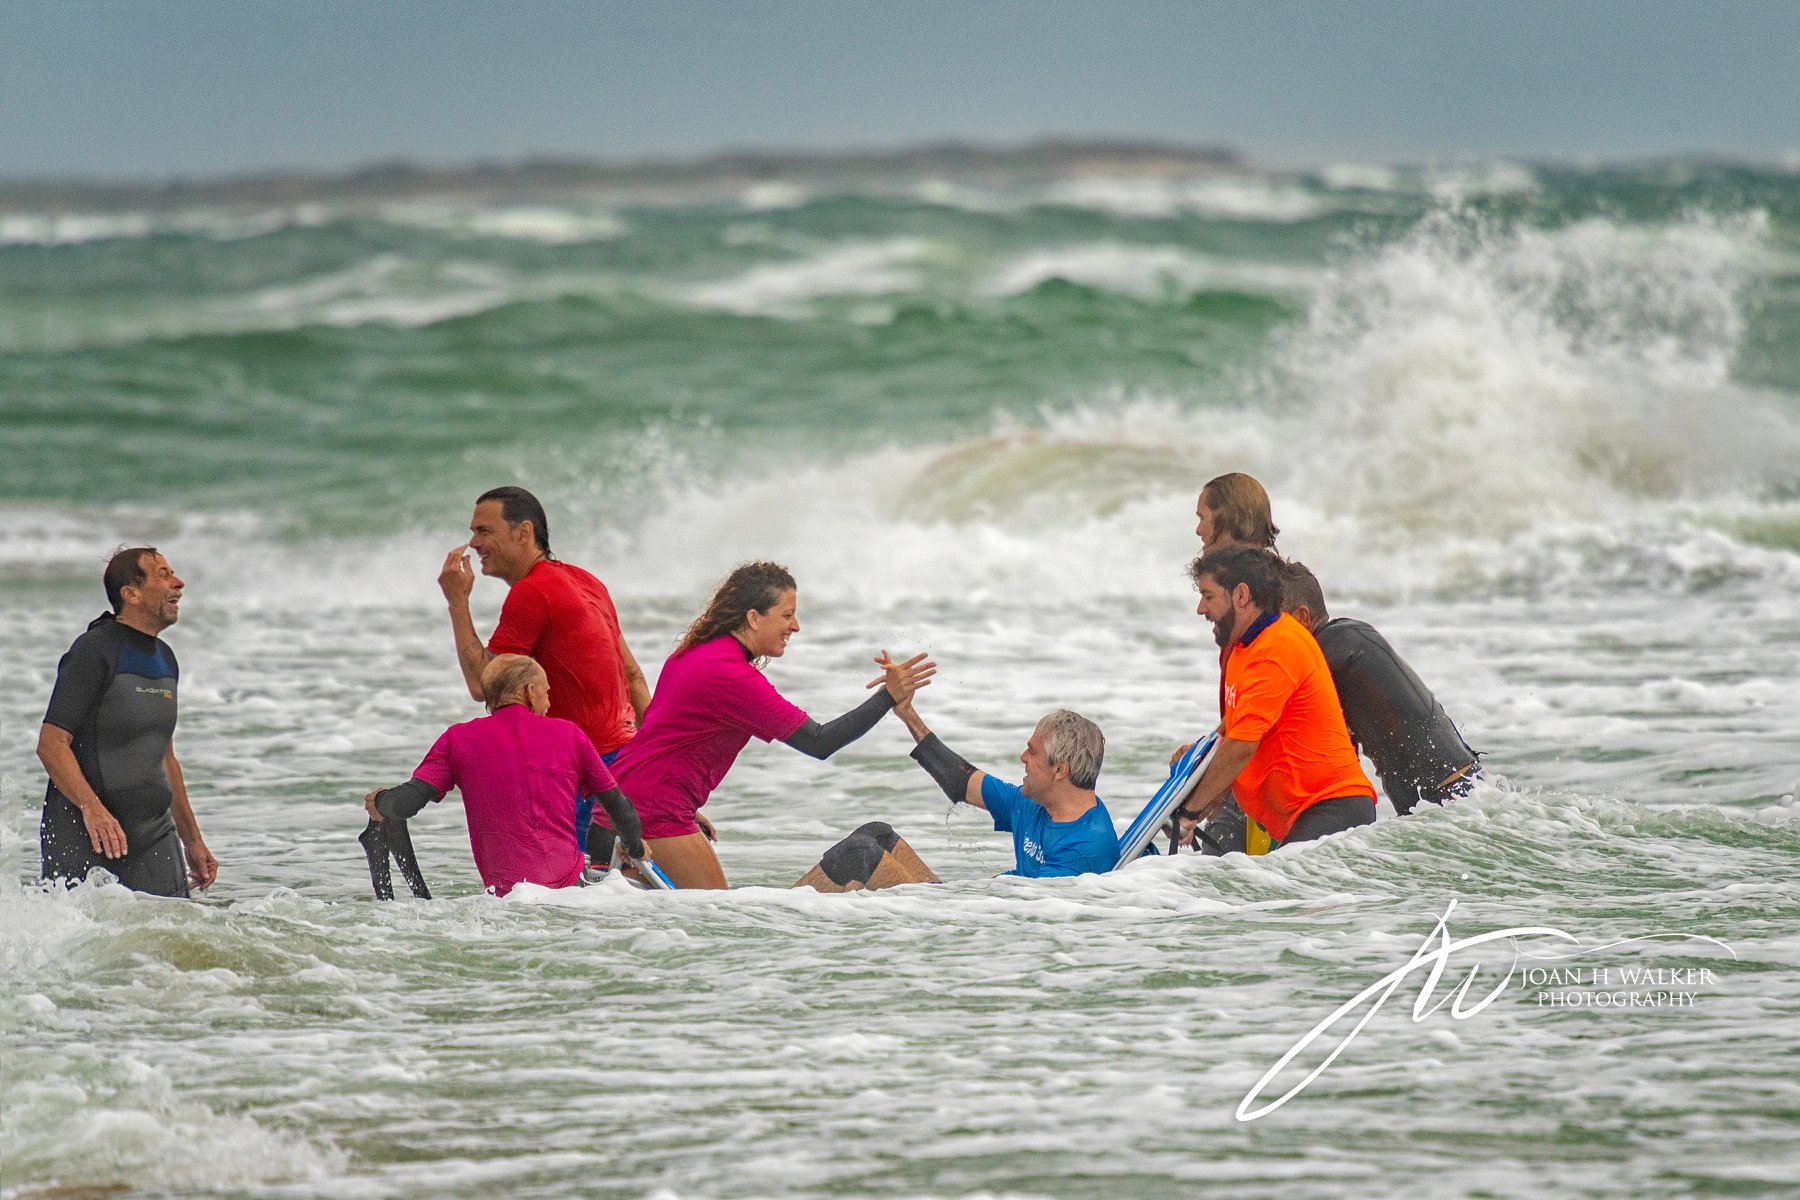 adaptive surfer and volunteer giving high fives in front of big waves